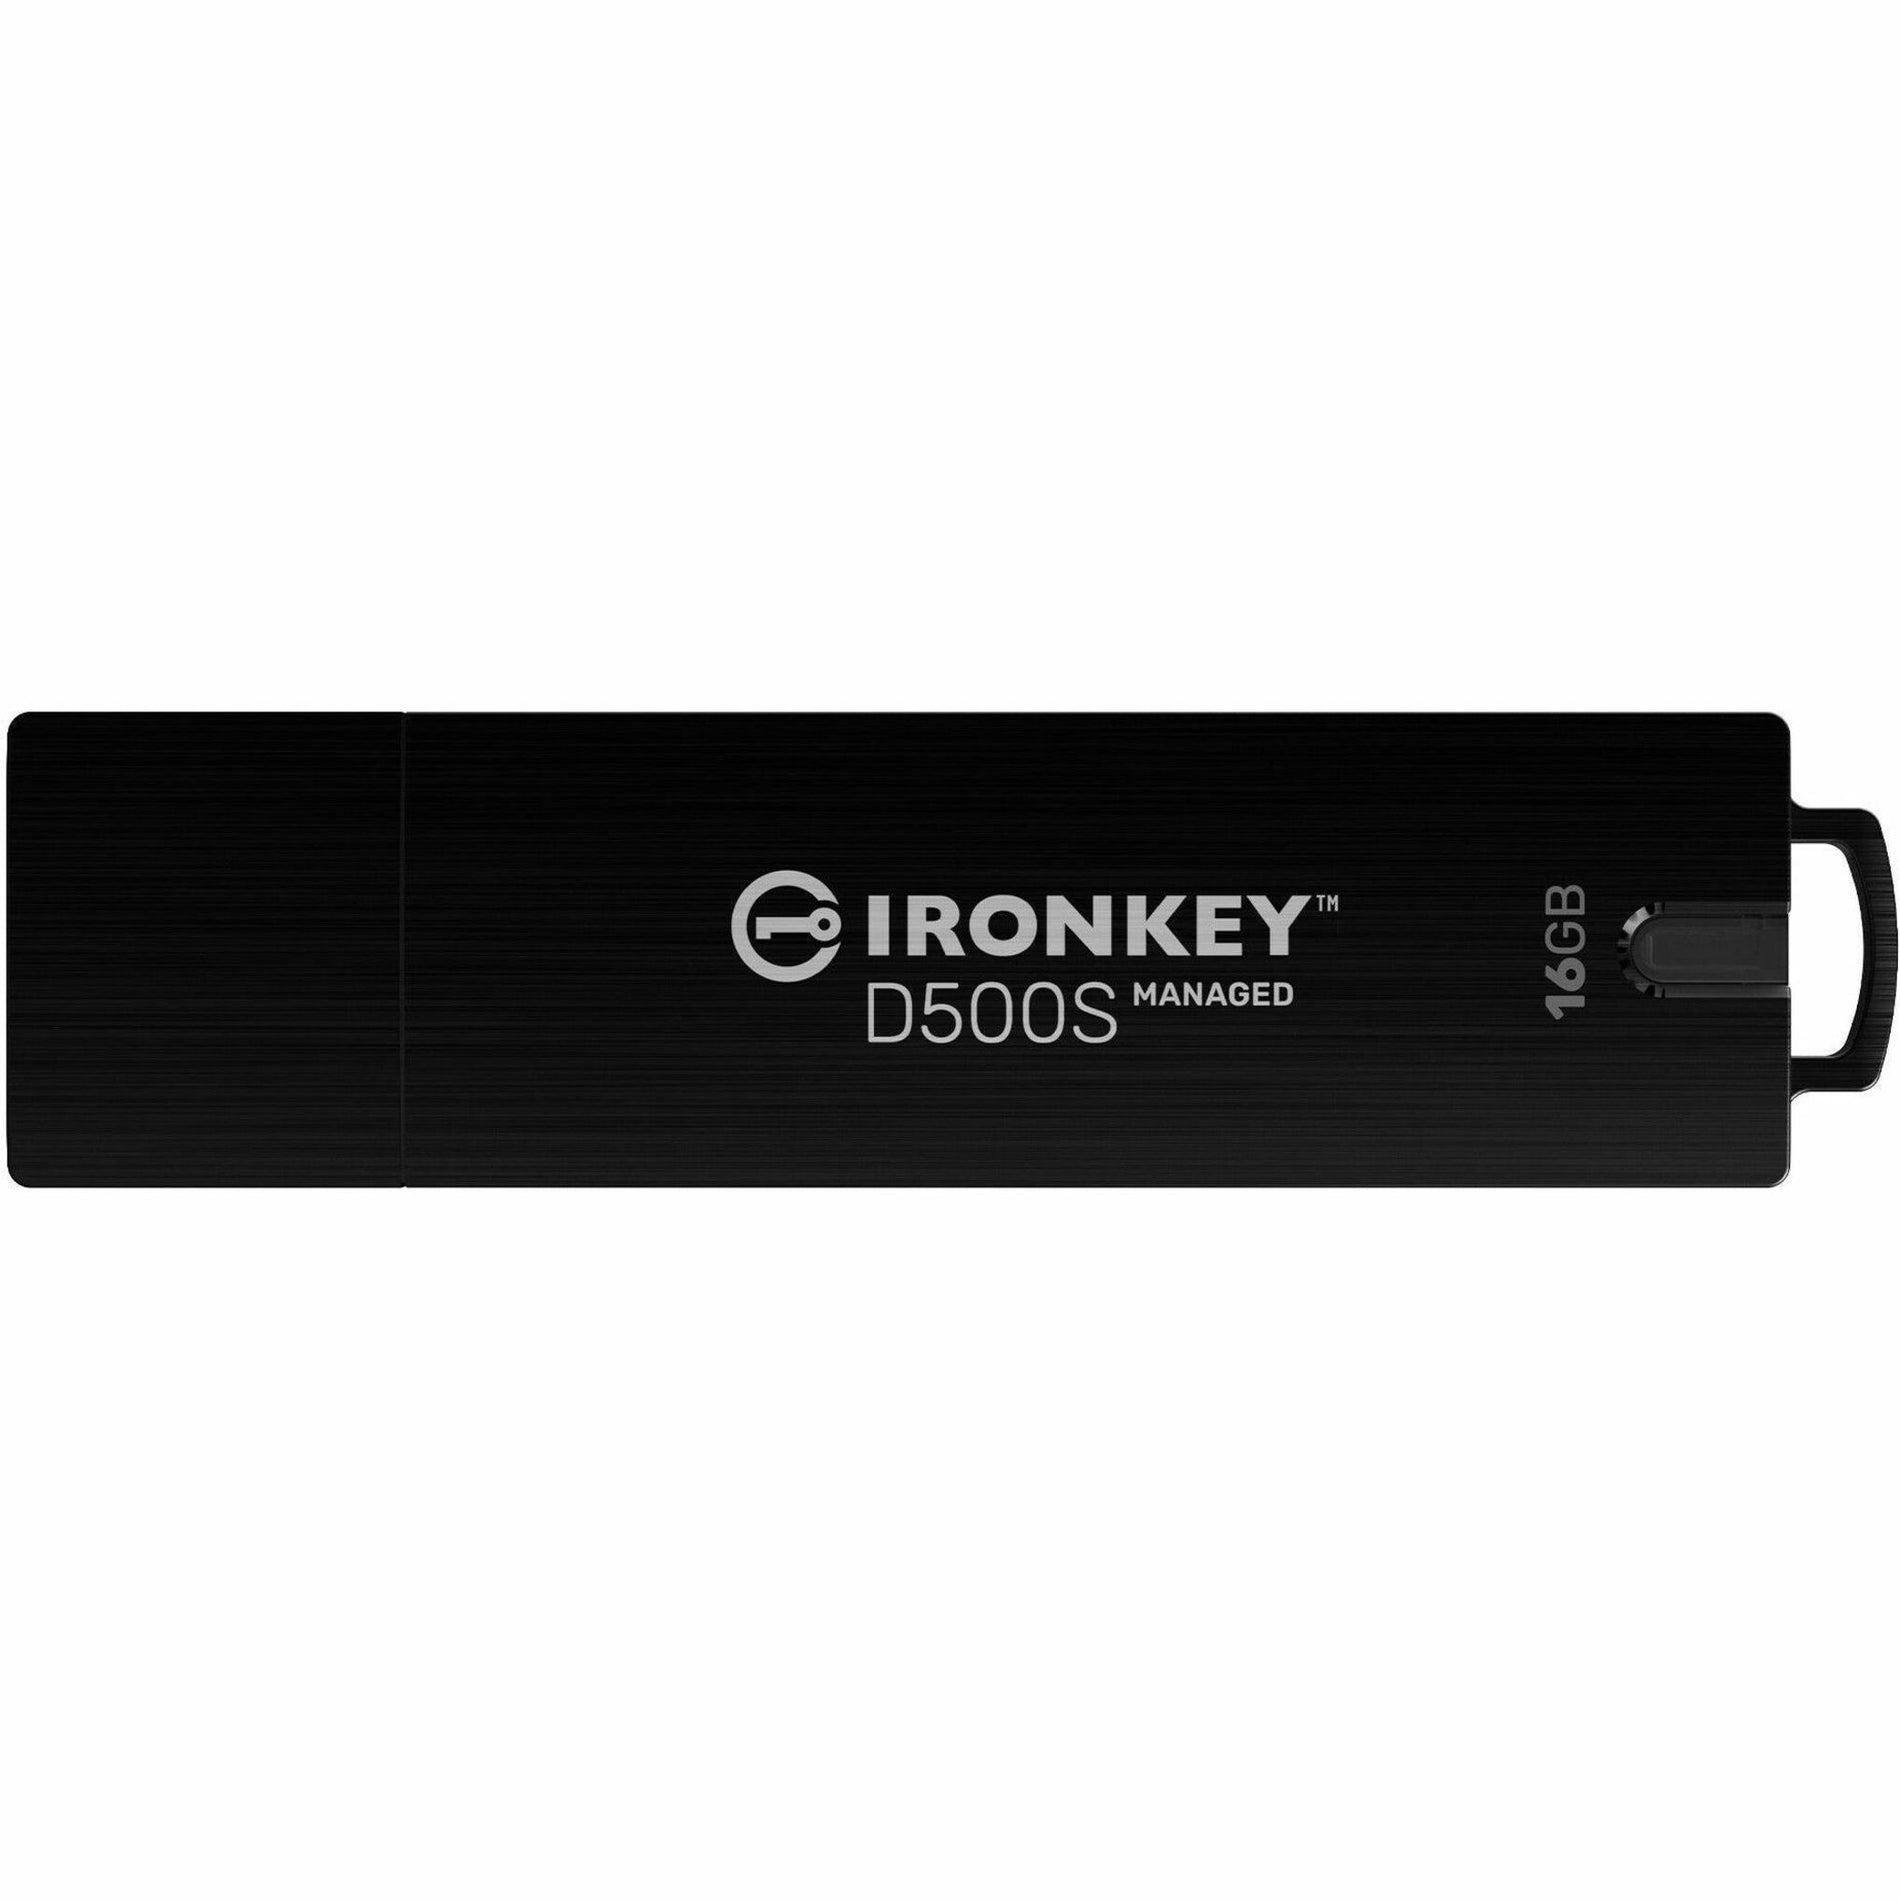 IronKey IKD500SM/16GB D500SM 16GB USB 3.2 (Gen 1) Type A Flash Drive, Rugged Casing, Password Protection, Water Proof